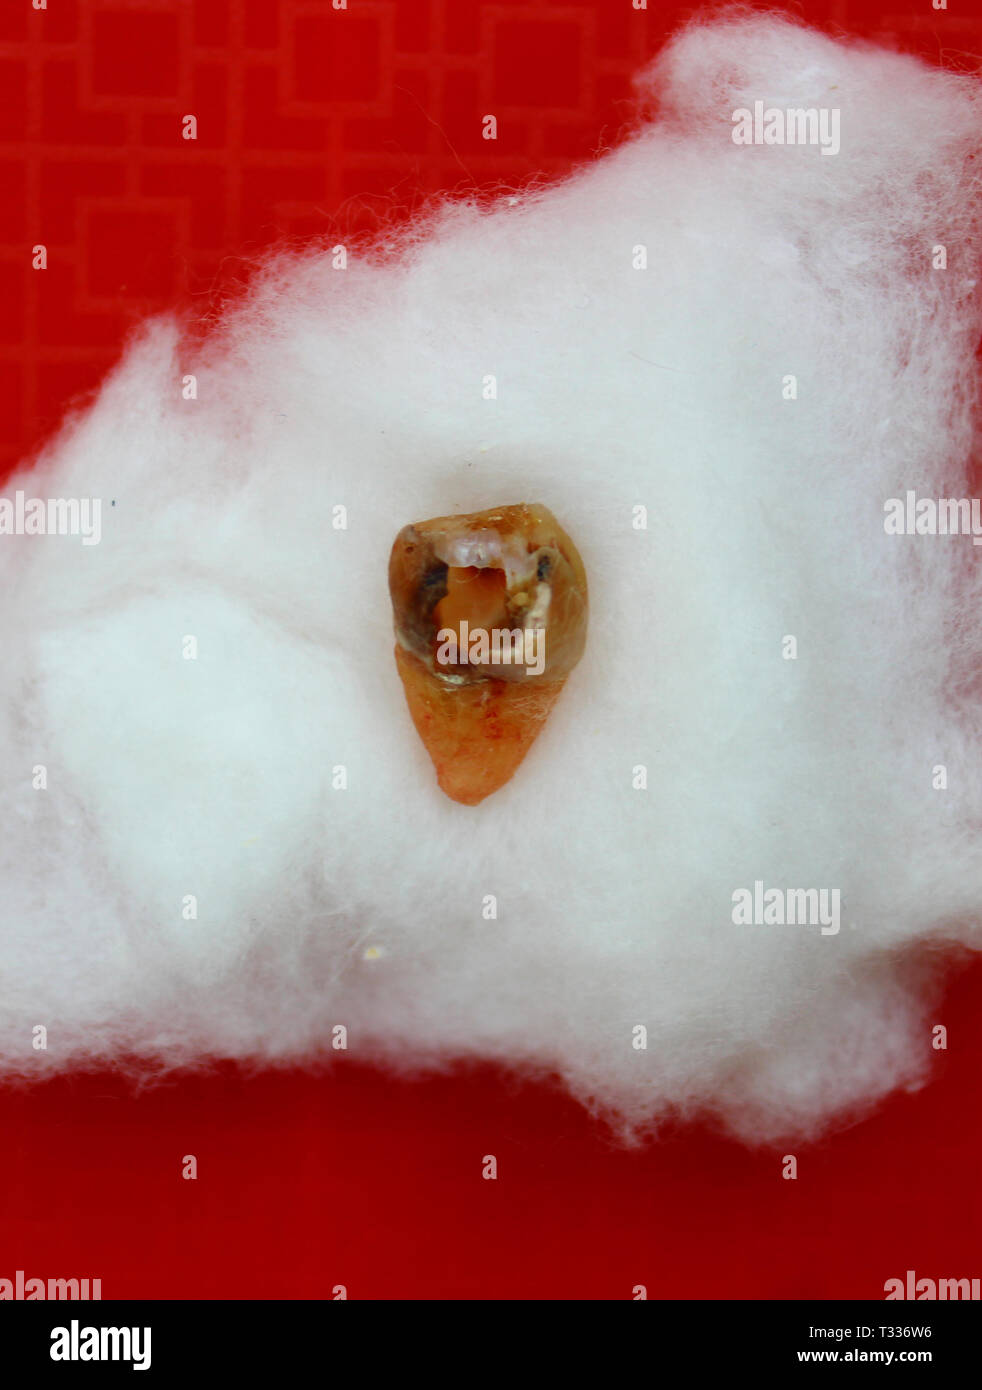 Wisdom tooth with cavity extracted from the mouth of an adult human female Stock Photo